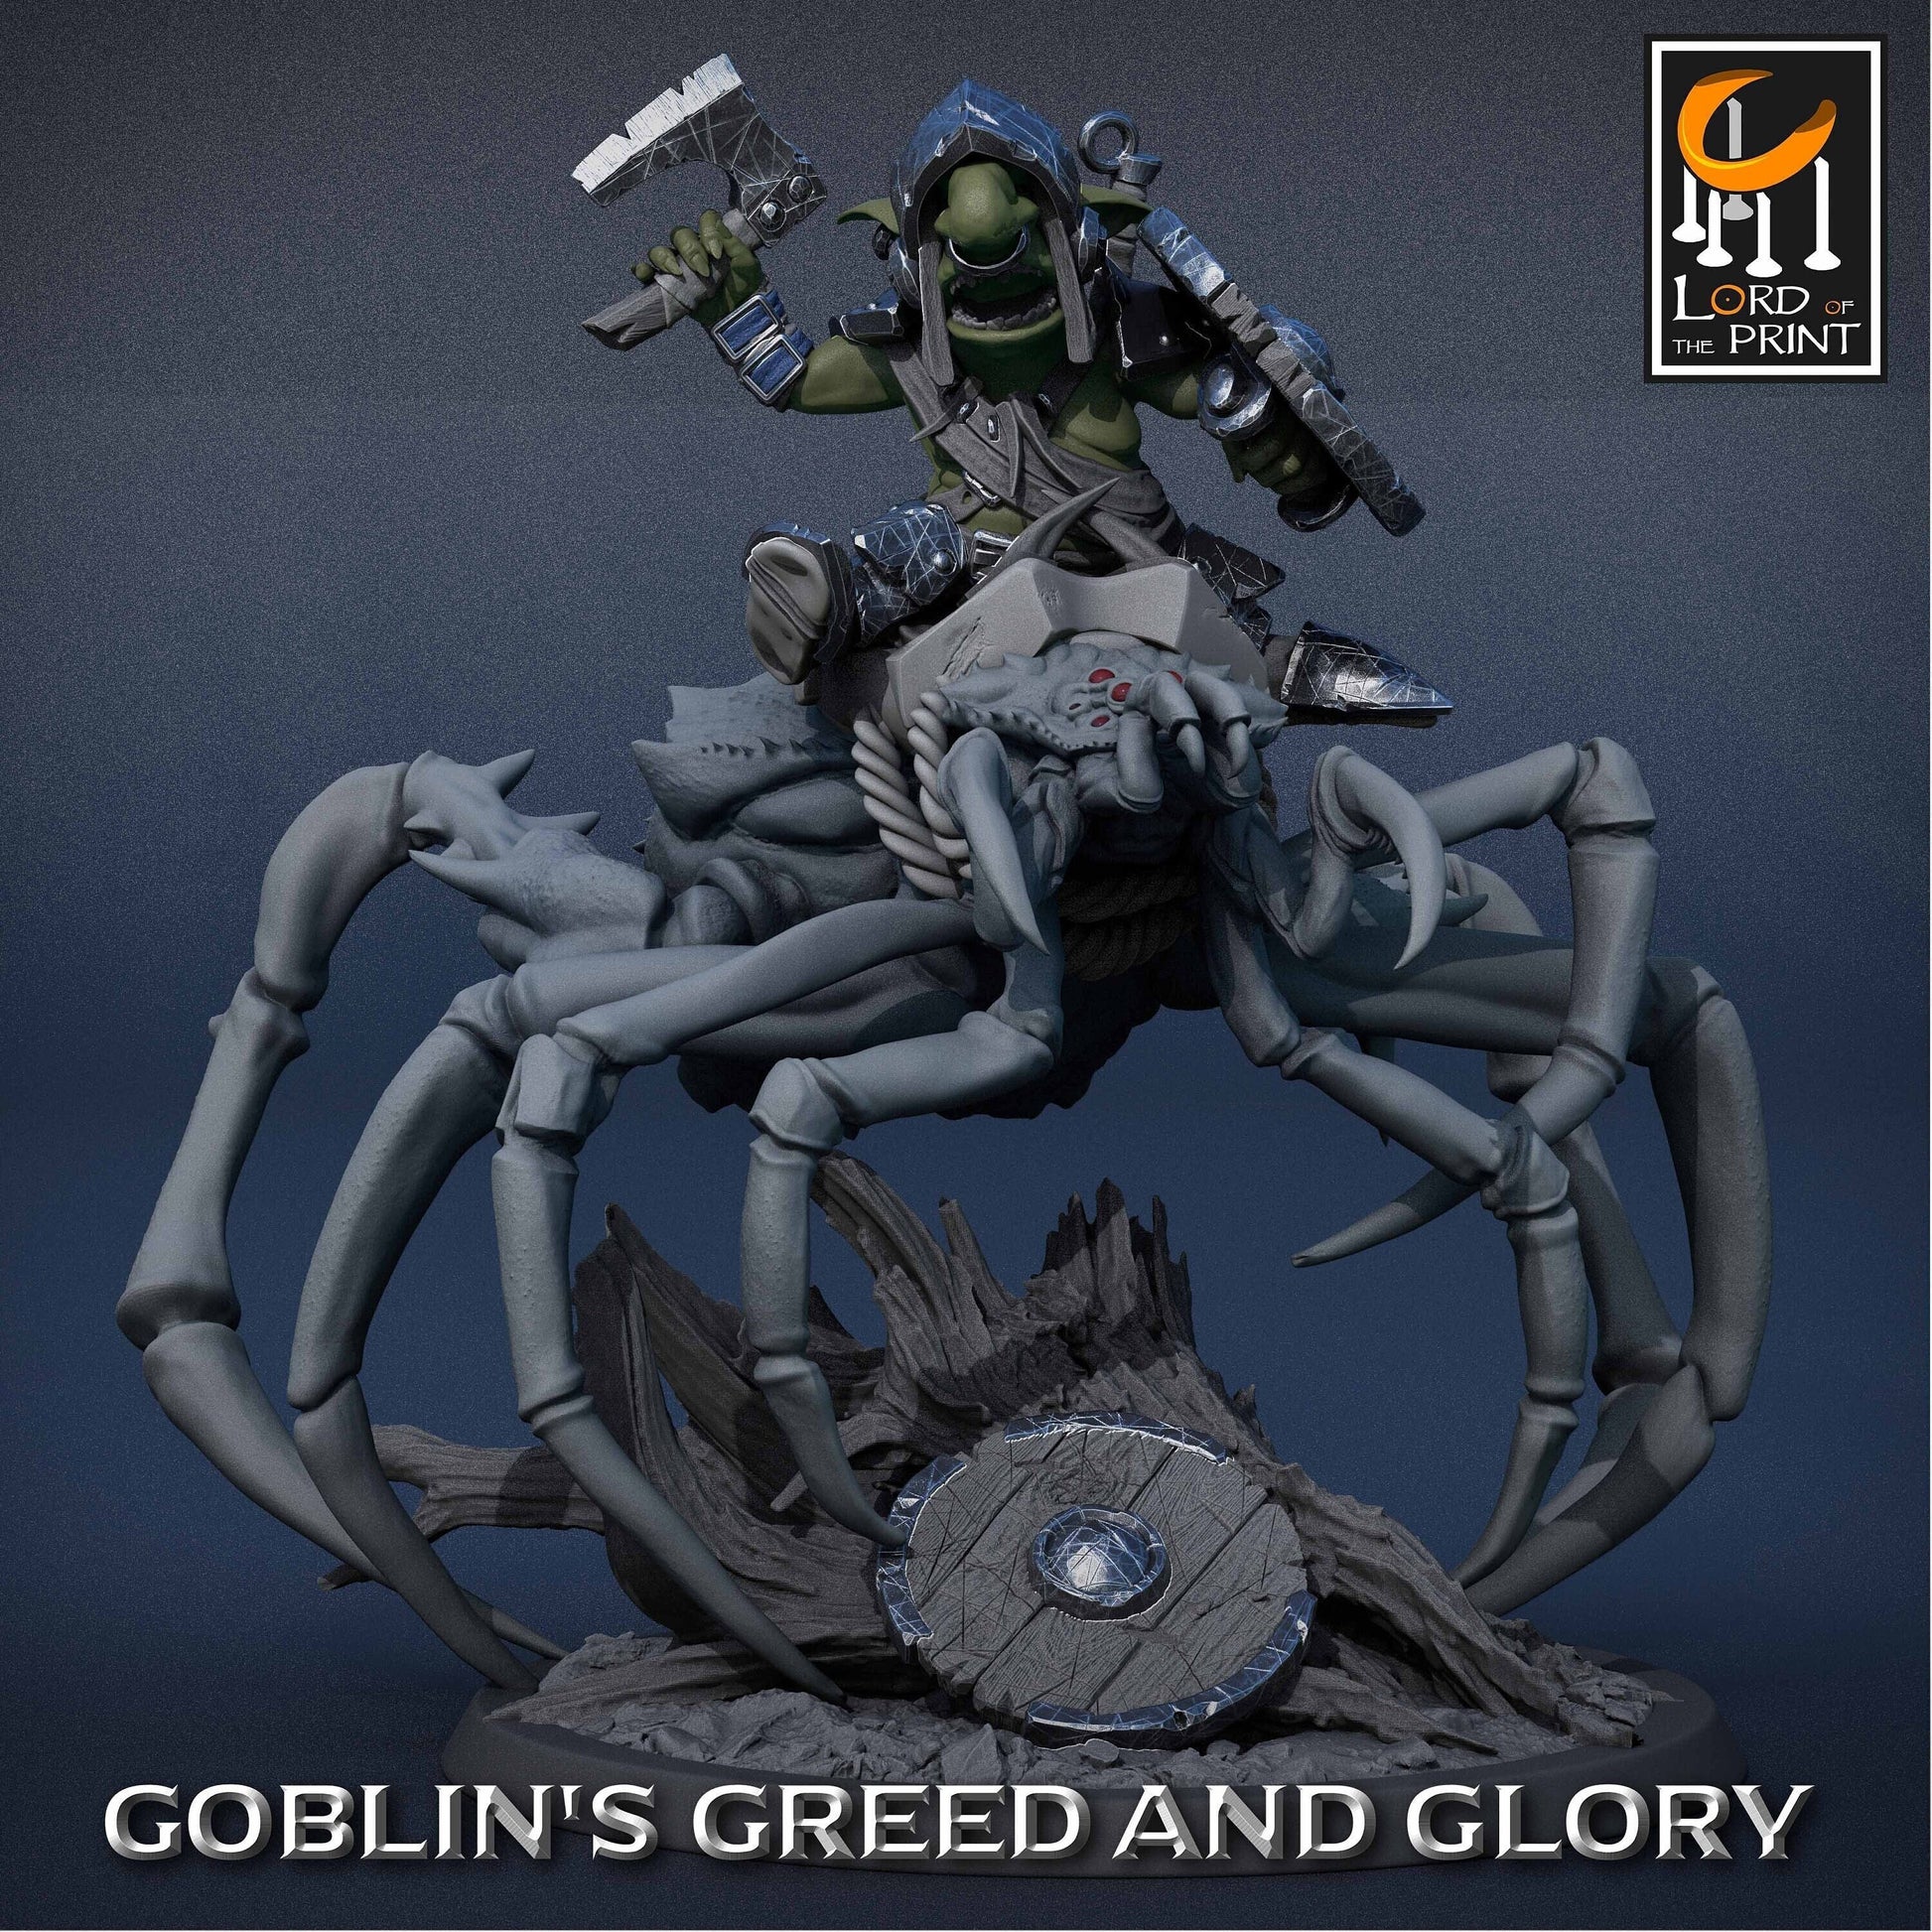 Goblin Spider Mounts (Set 2) by Lord of the Print | Please Read Description